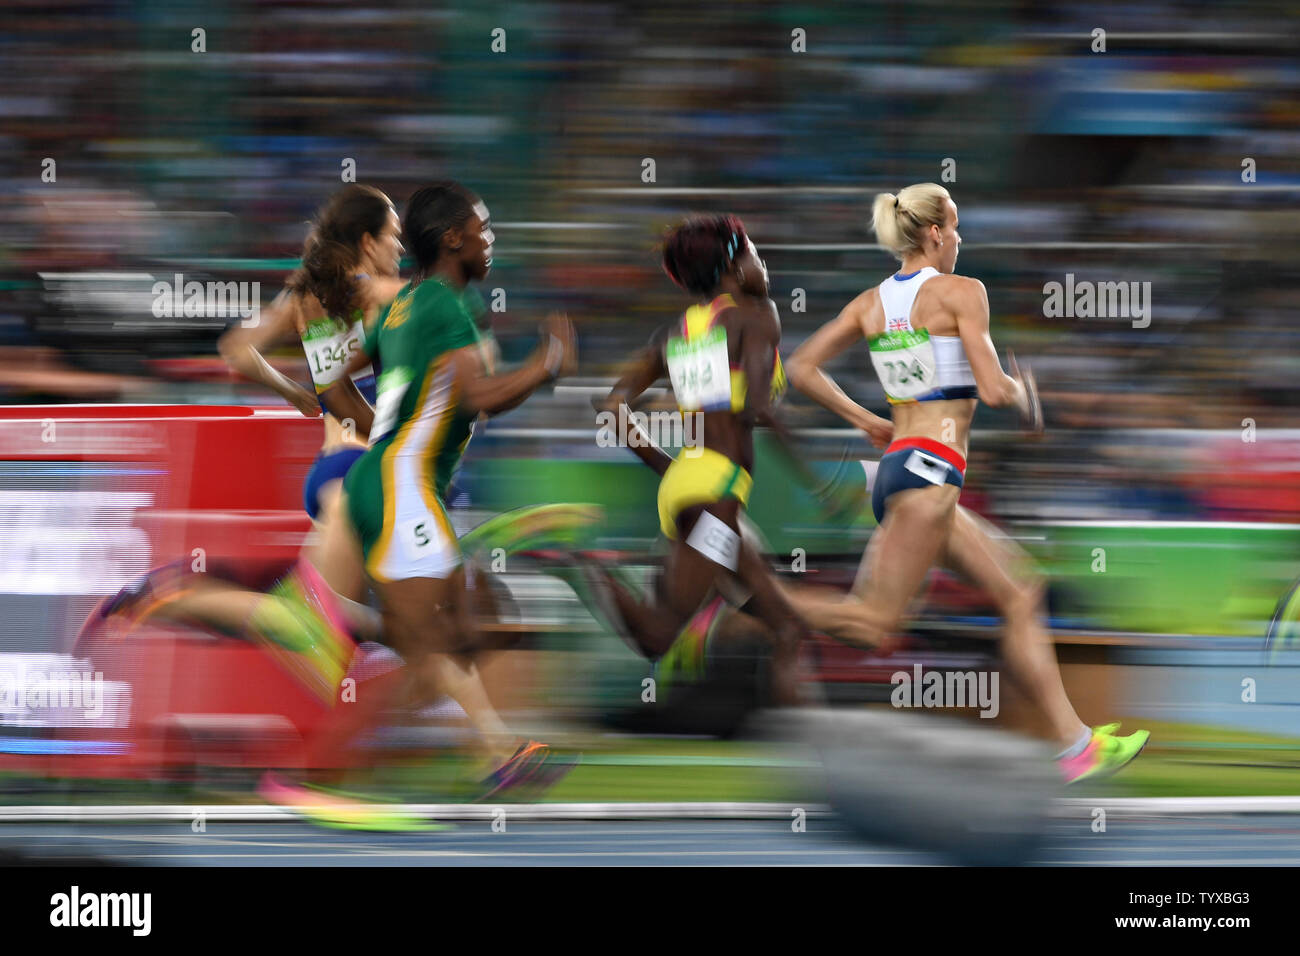 Runners competing in the Women's 800m Semifinal 2 at the 2016 Rio Summer Olympics in Rio de Janeiro, Brazil, on August 18, 2016.   Photo by Richard Ellis/UPI Stock Photo